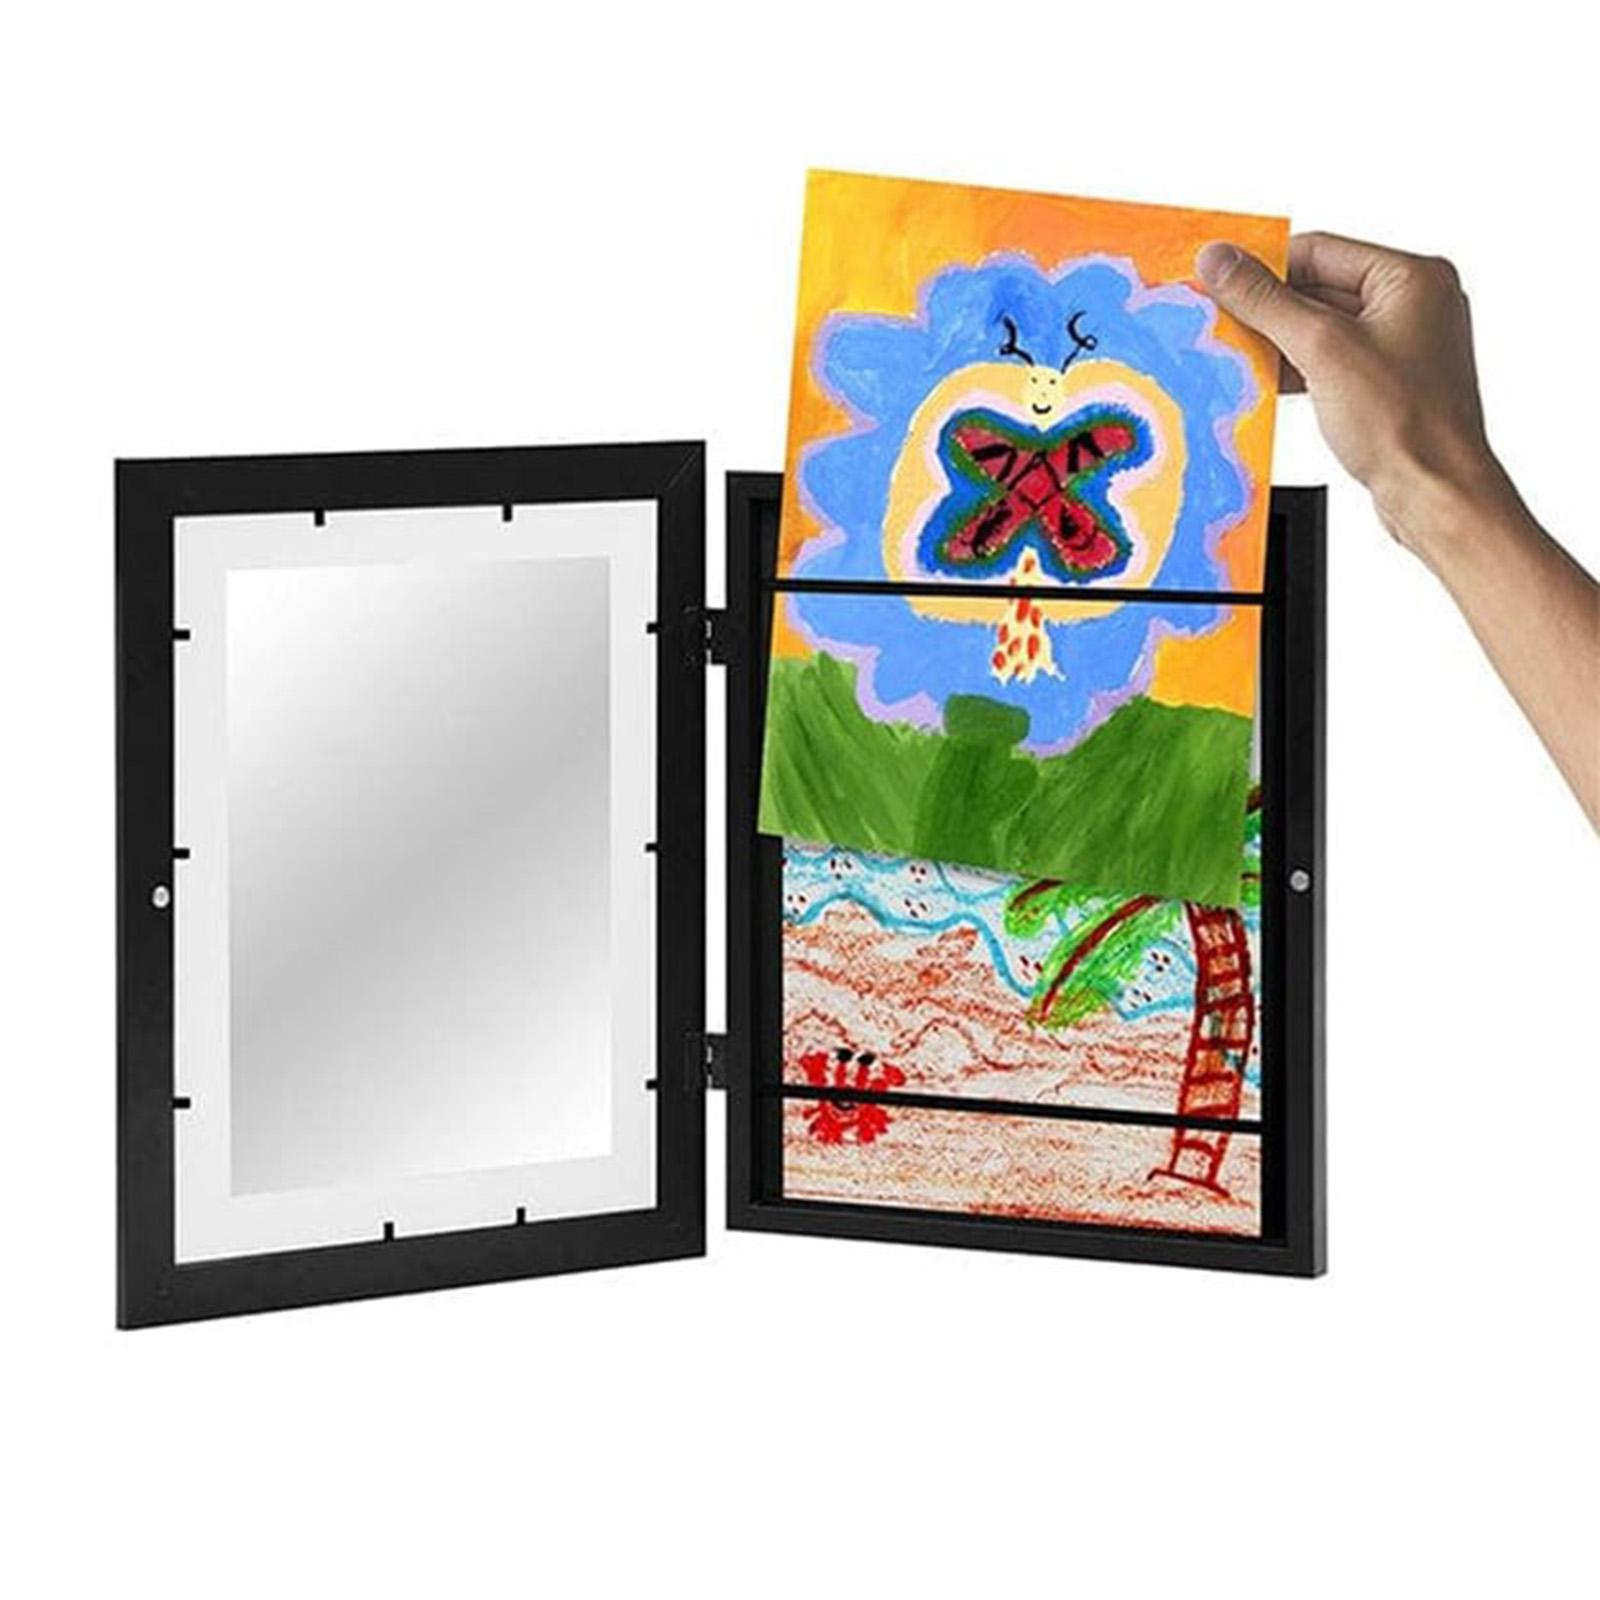 Kids Artwork Picture Frame in Black for Crafts Children Drawings Pictures